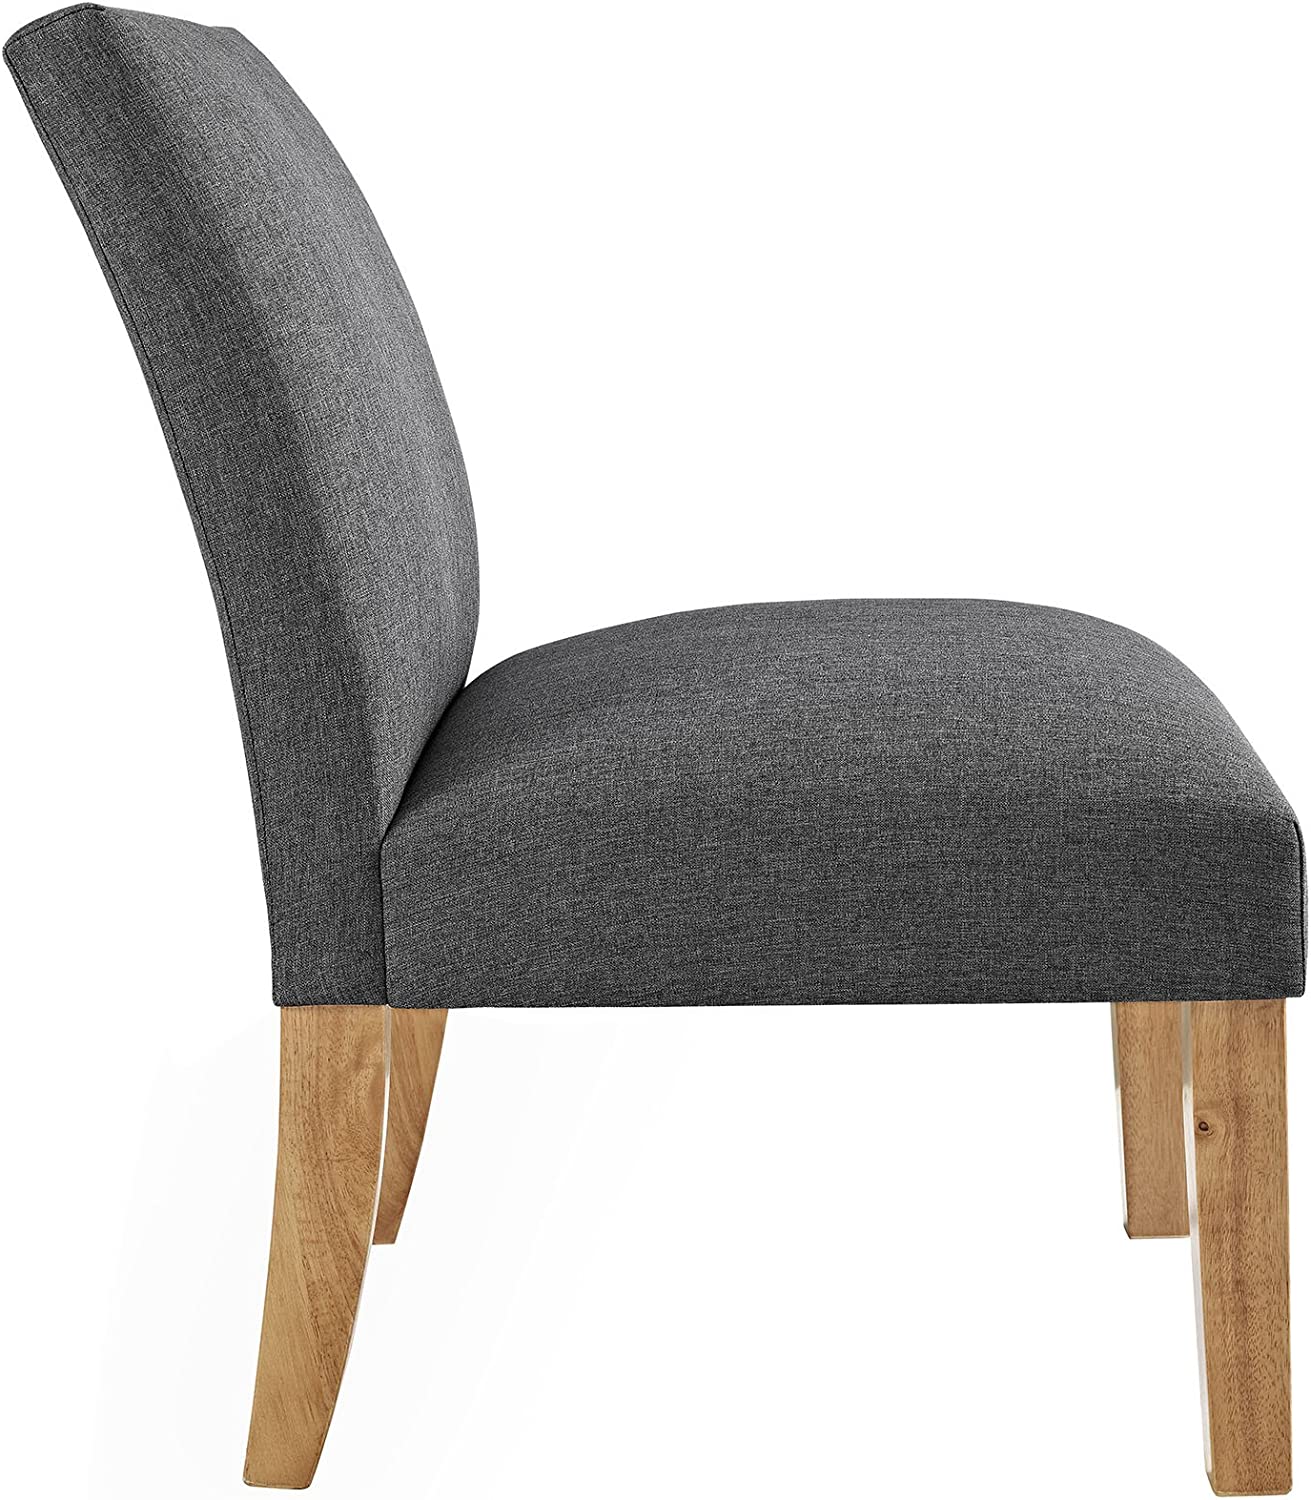 Modway Auteur Fabric Armchair in Gray